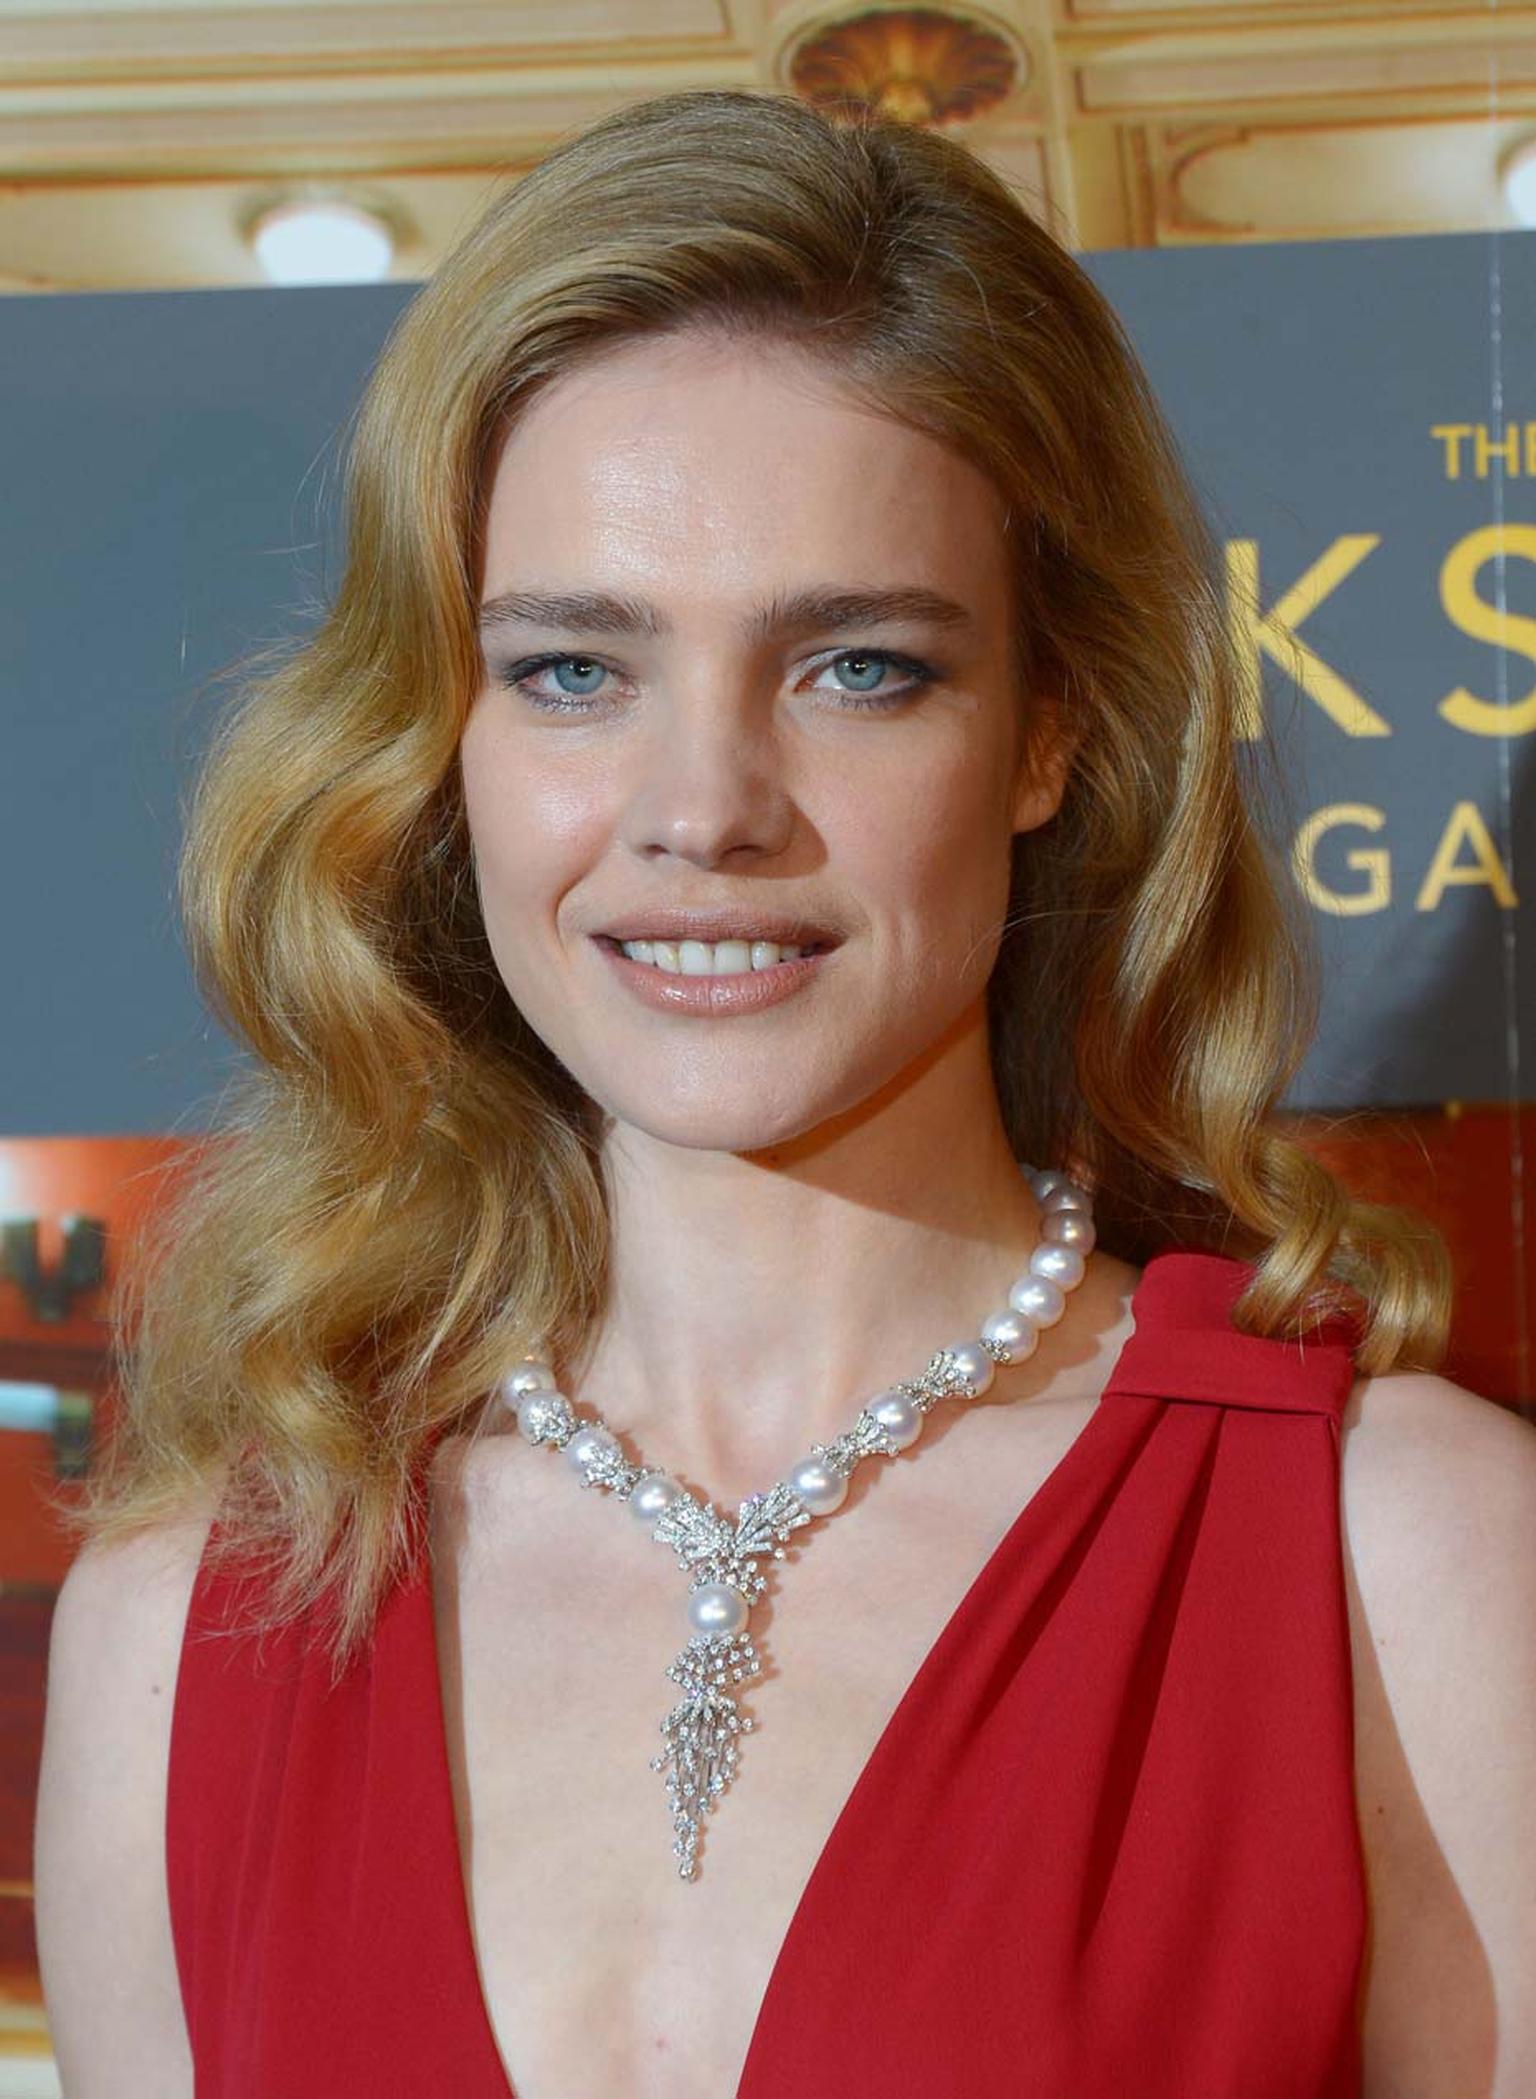 Supermodel Natalia Vodianova wore a YOKO London South Sea pearl necklace to a gala dinner in aid of her Naked Heart Foundation children's charity, in London.